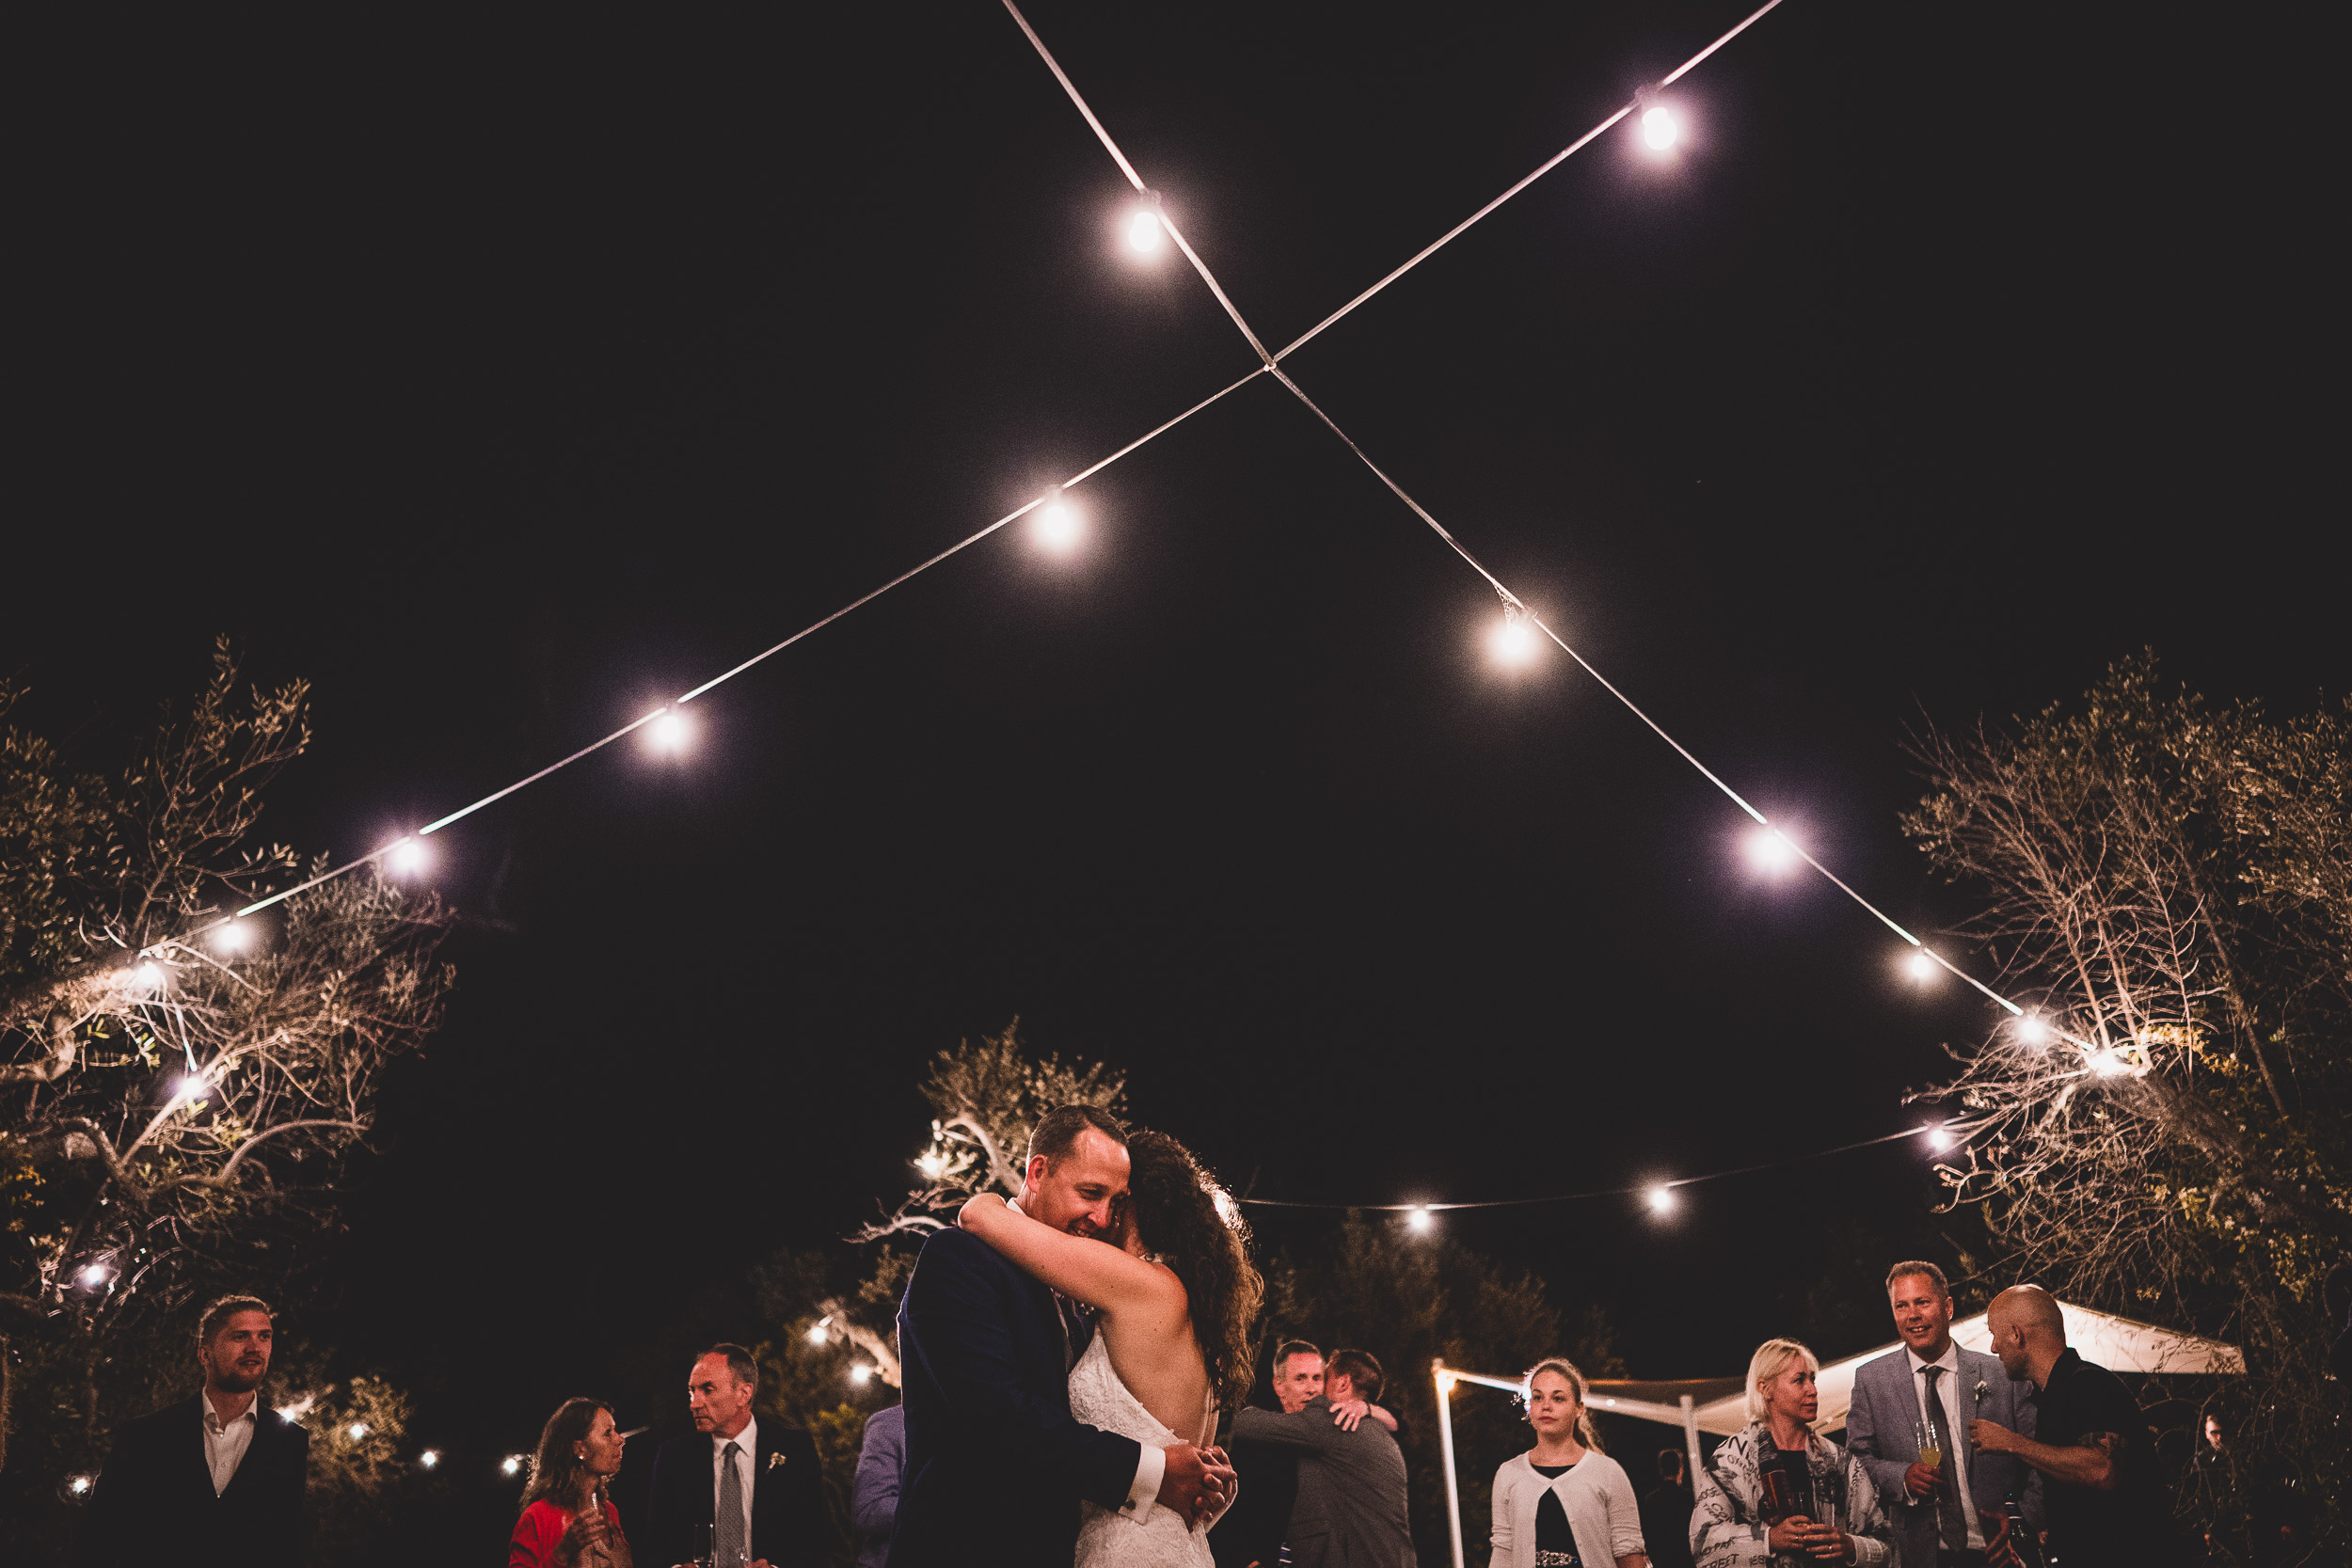 A wedding photo of the bride and groom kissing under string lights at night.